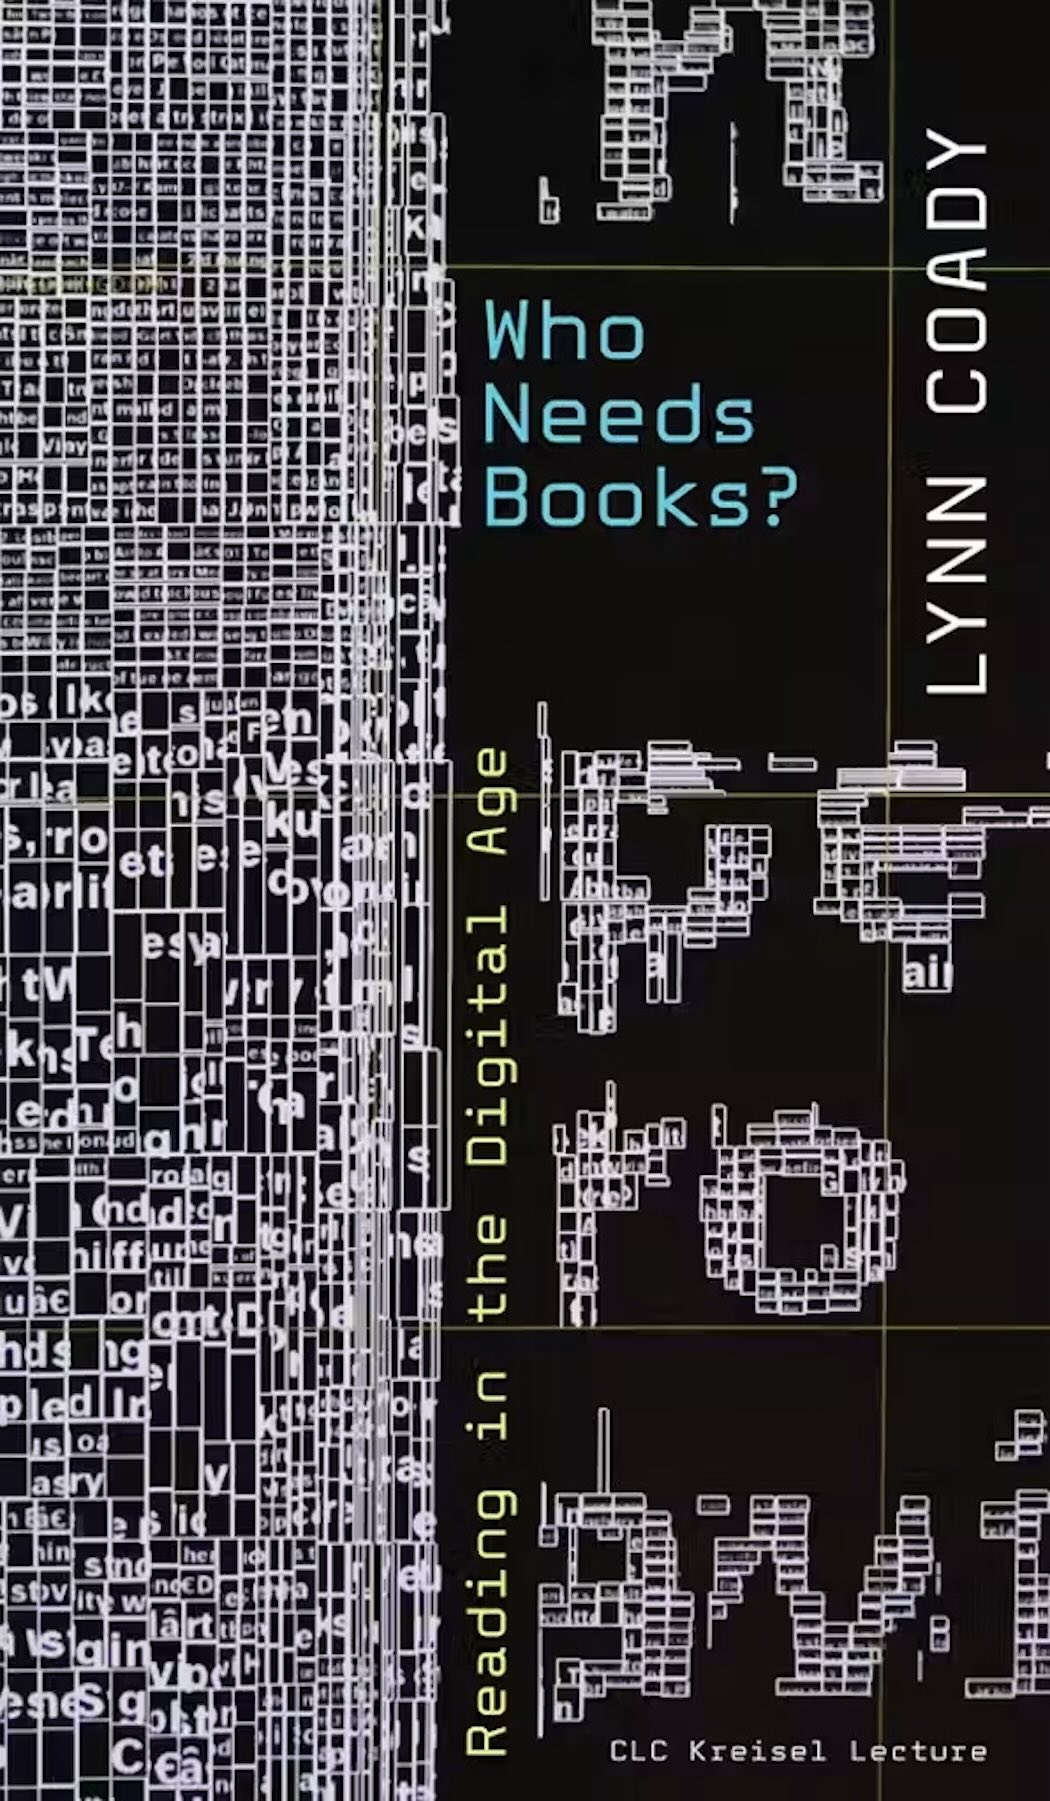 Cover Image of Lynn Coady's Kreisel Publication Titled Who Needs Books?